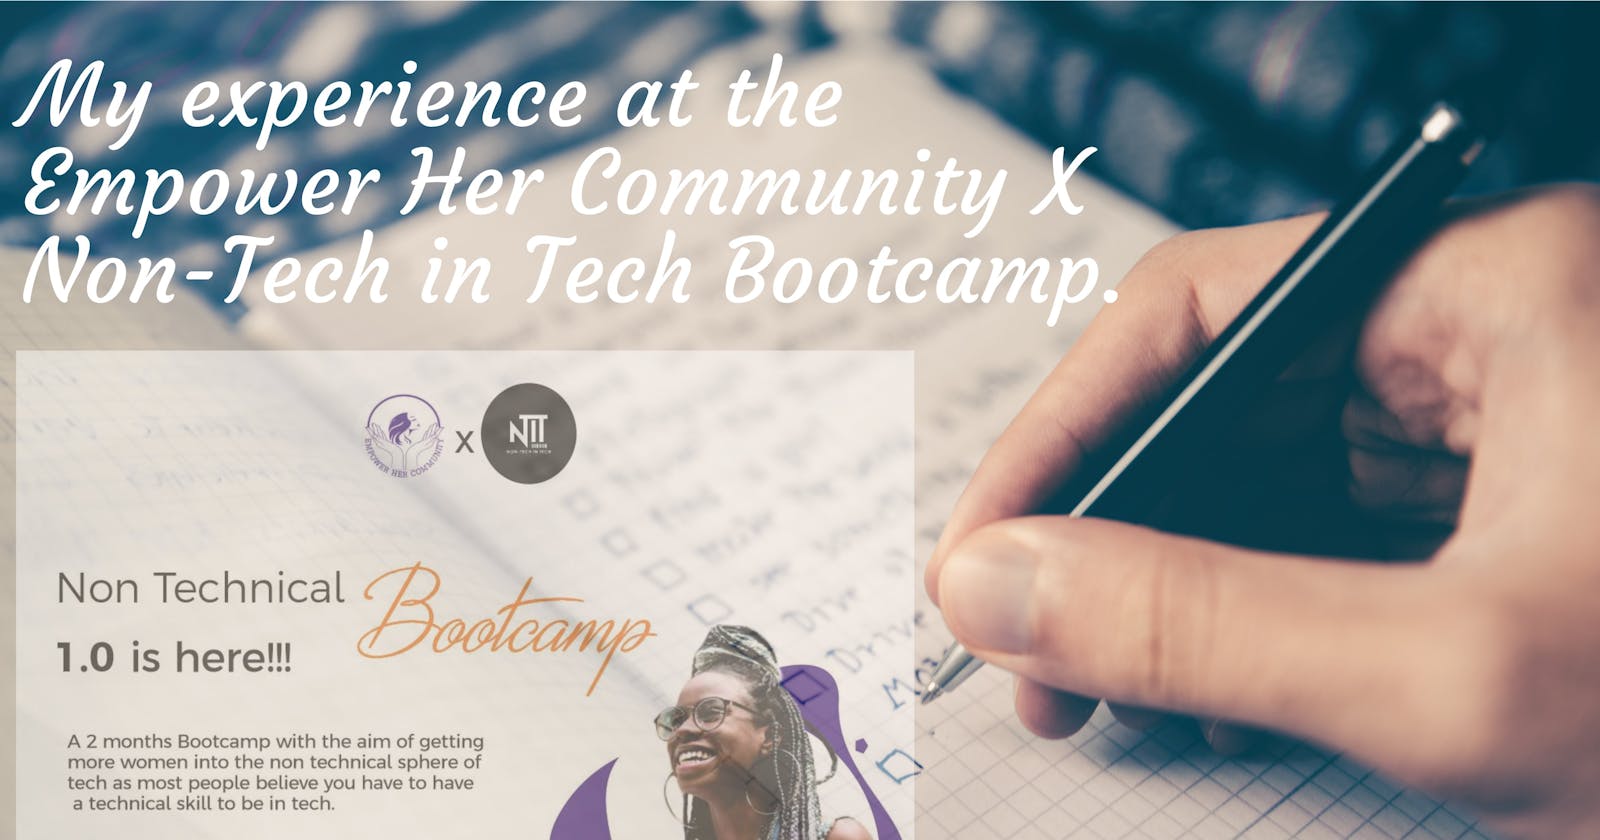 My experience at the Empower Her Community X Non-Tech in Tech Bootcamp.